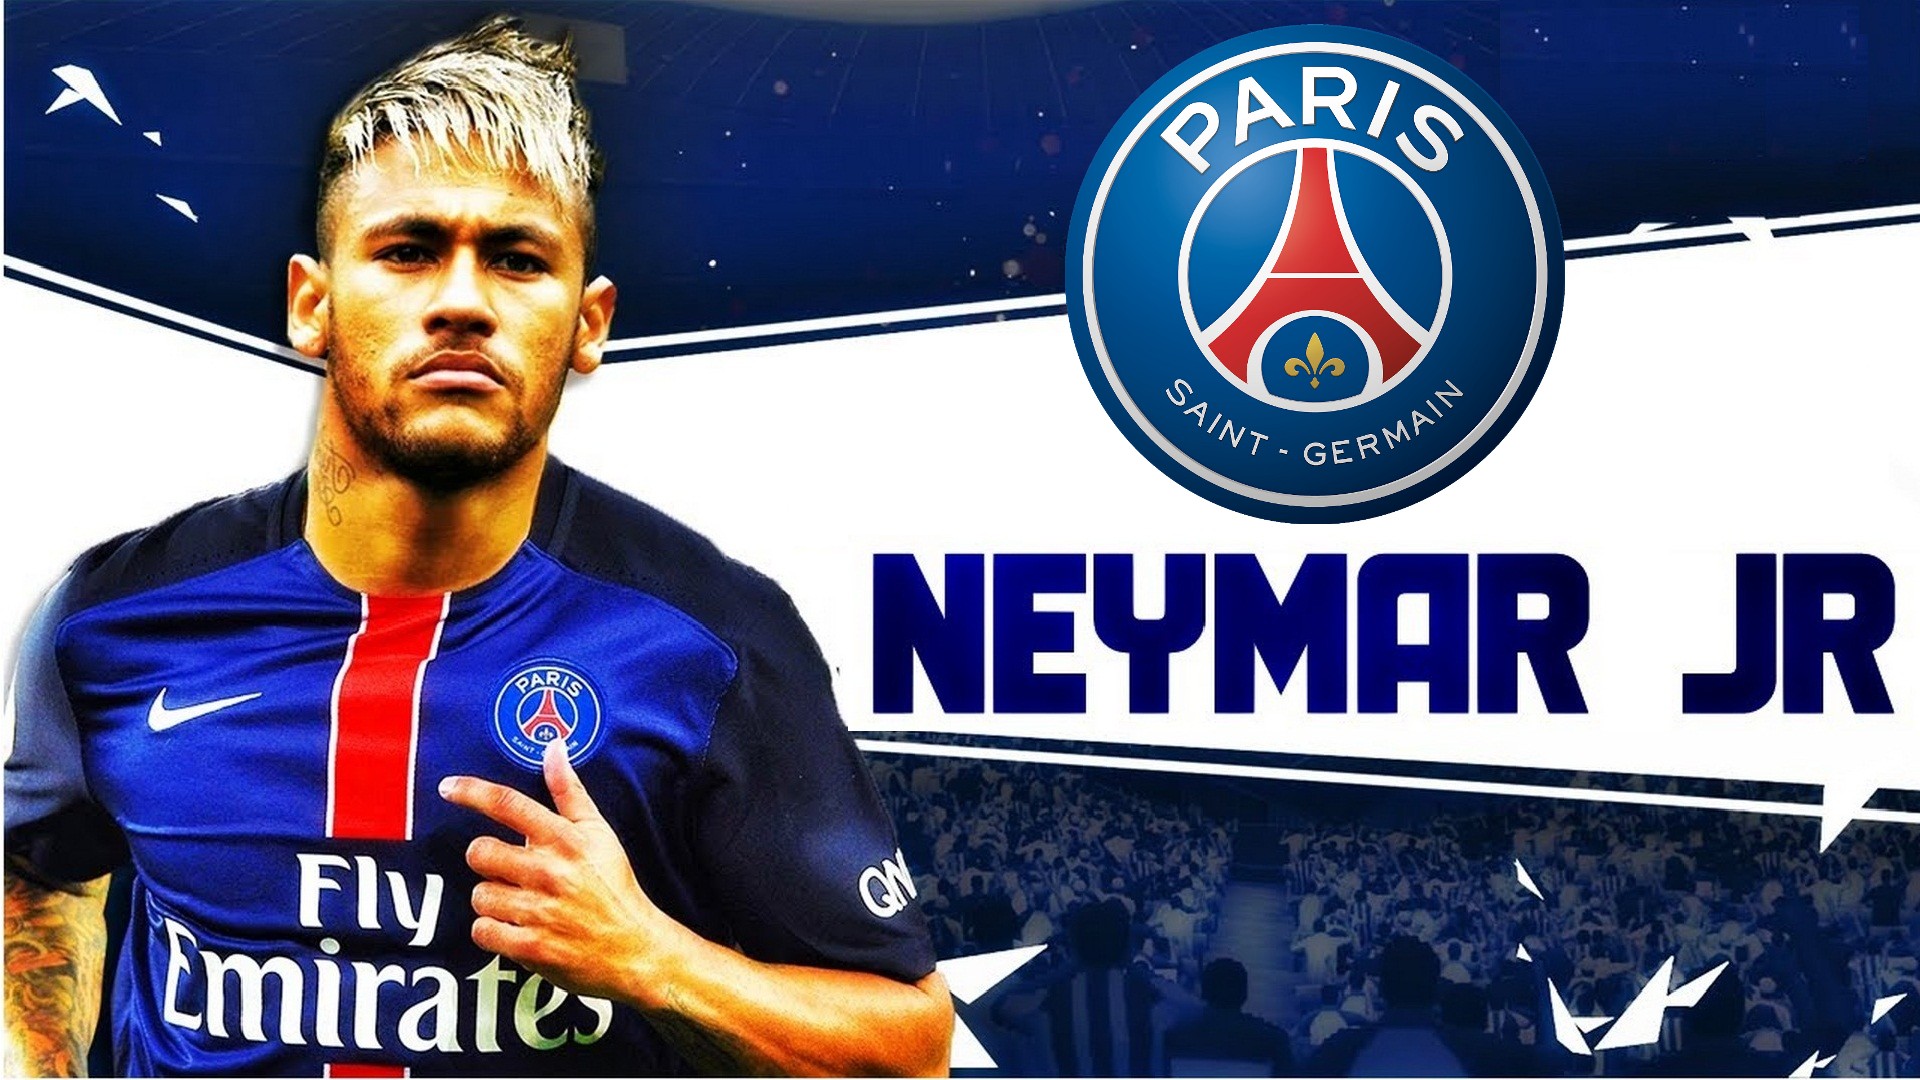 Neymar Paris Saint-Germain Wallpaper With Resolution 1920X1080 pixel. You can make this wallpaper for your Mac or Windows Desktop Background, iPhone, Android or Tablet and another Smartphone device for free